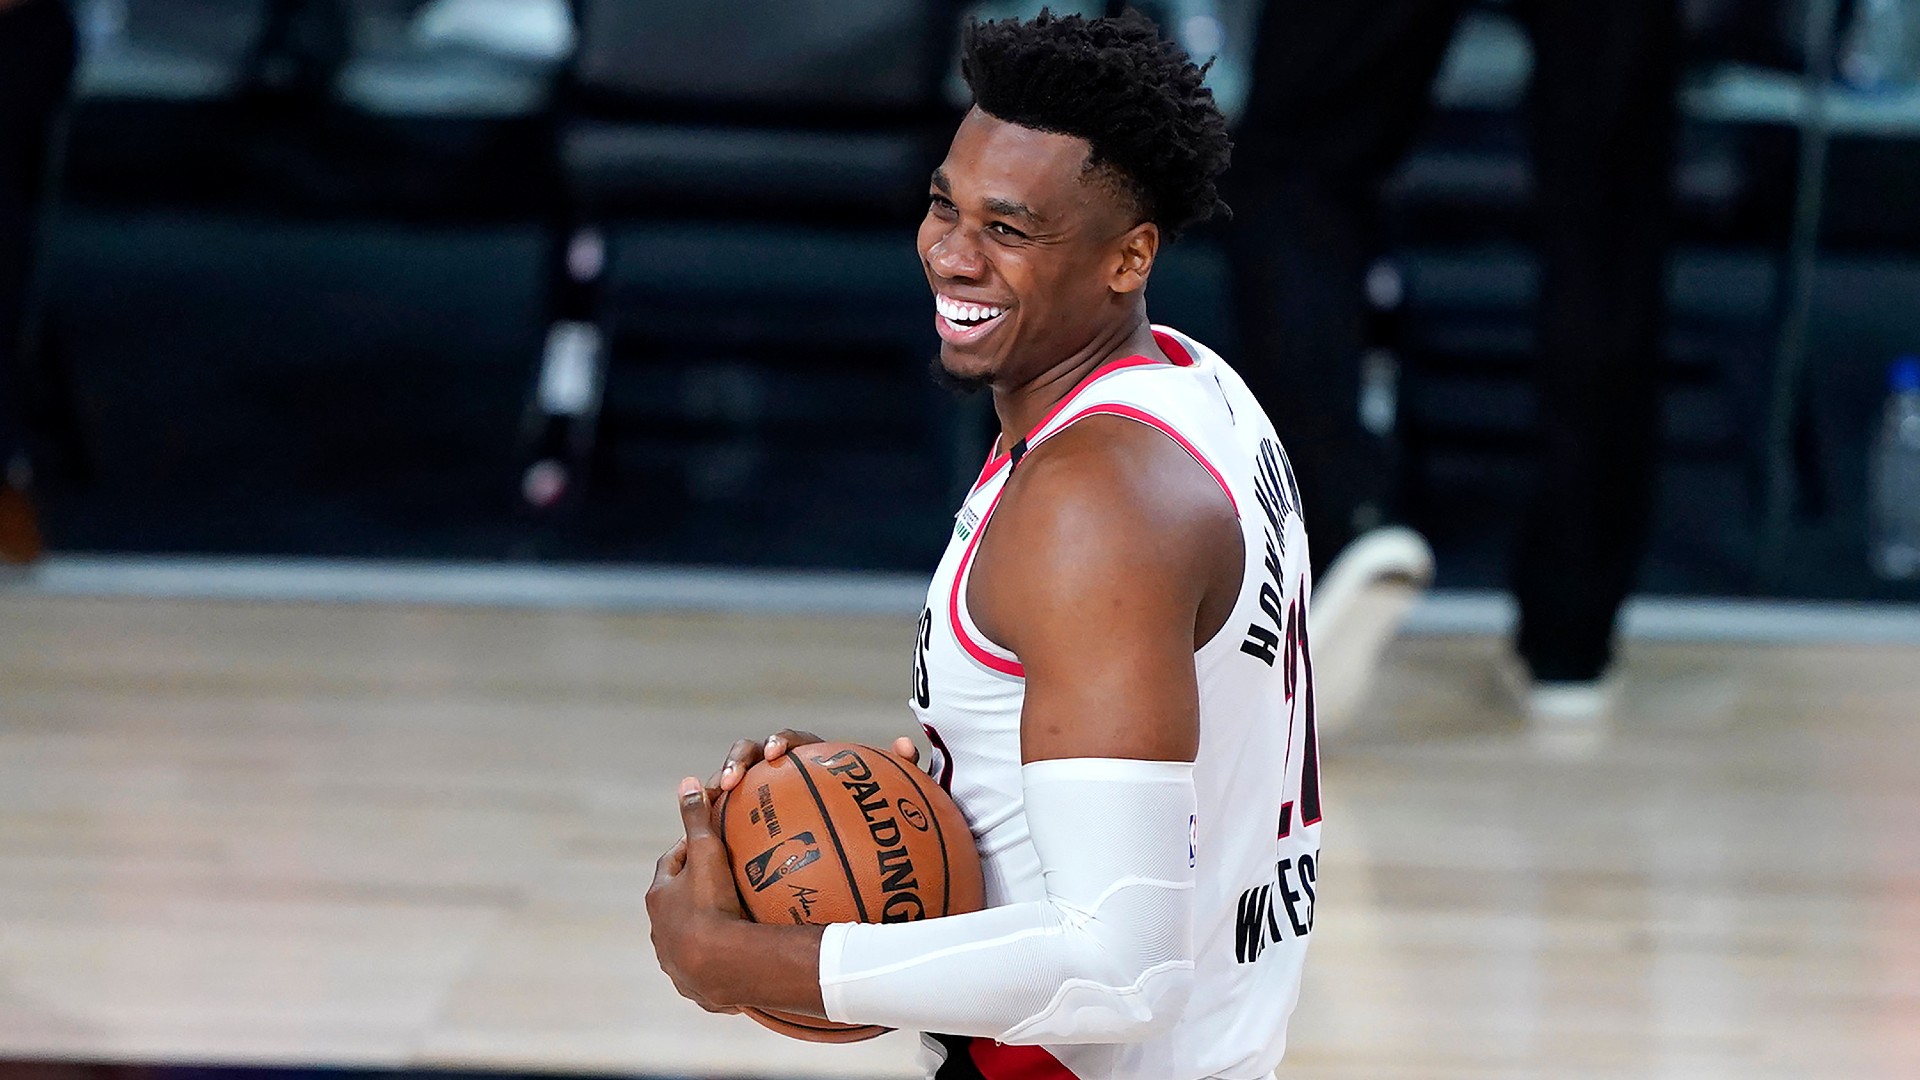 Nets Rumors: Nets Could Pursue Free Agent Hassan Whiteside